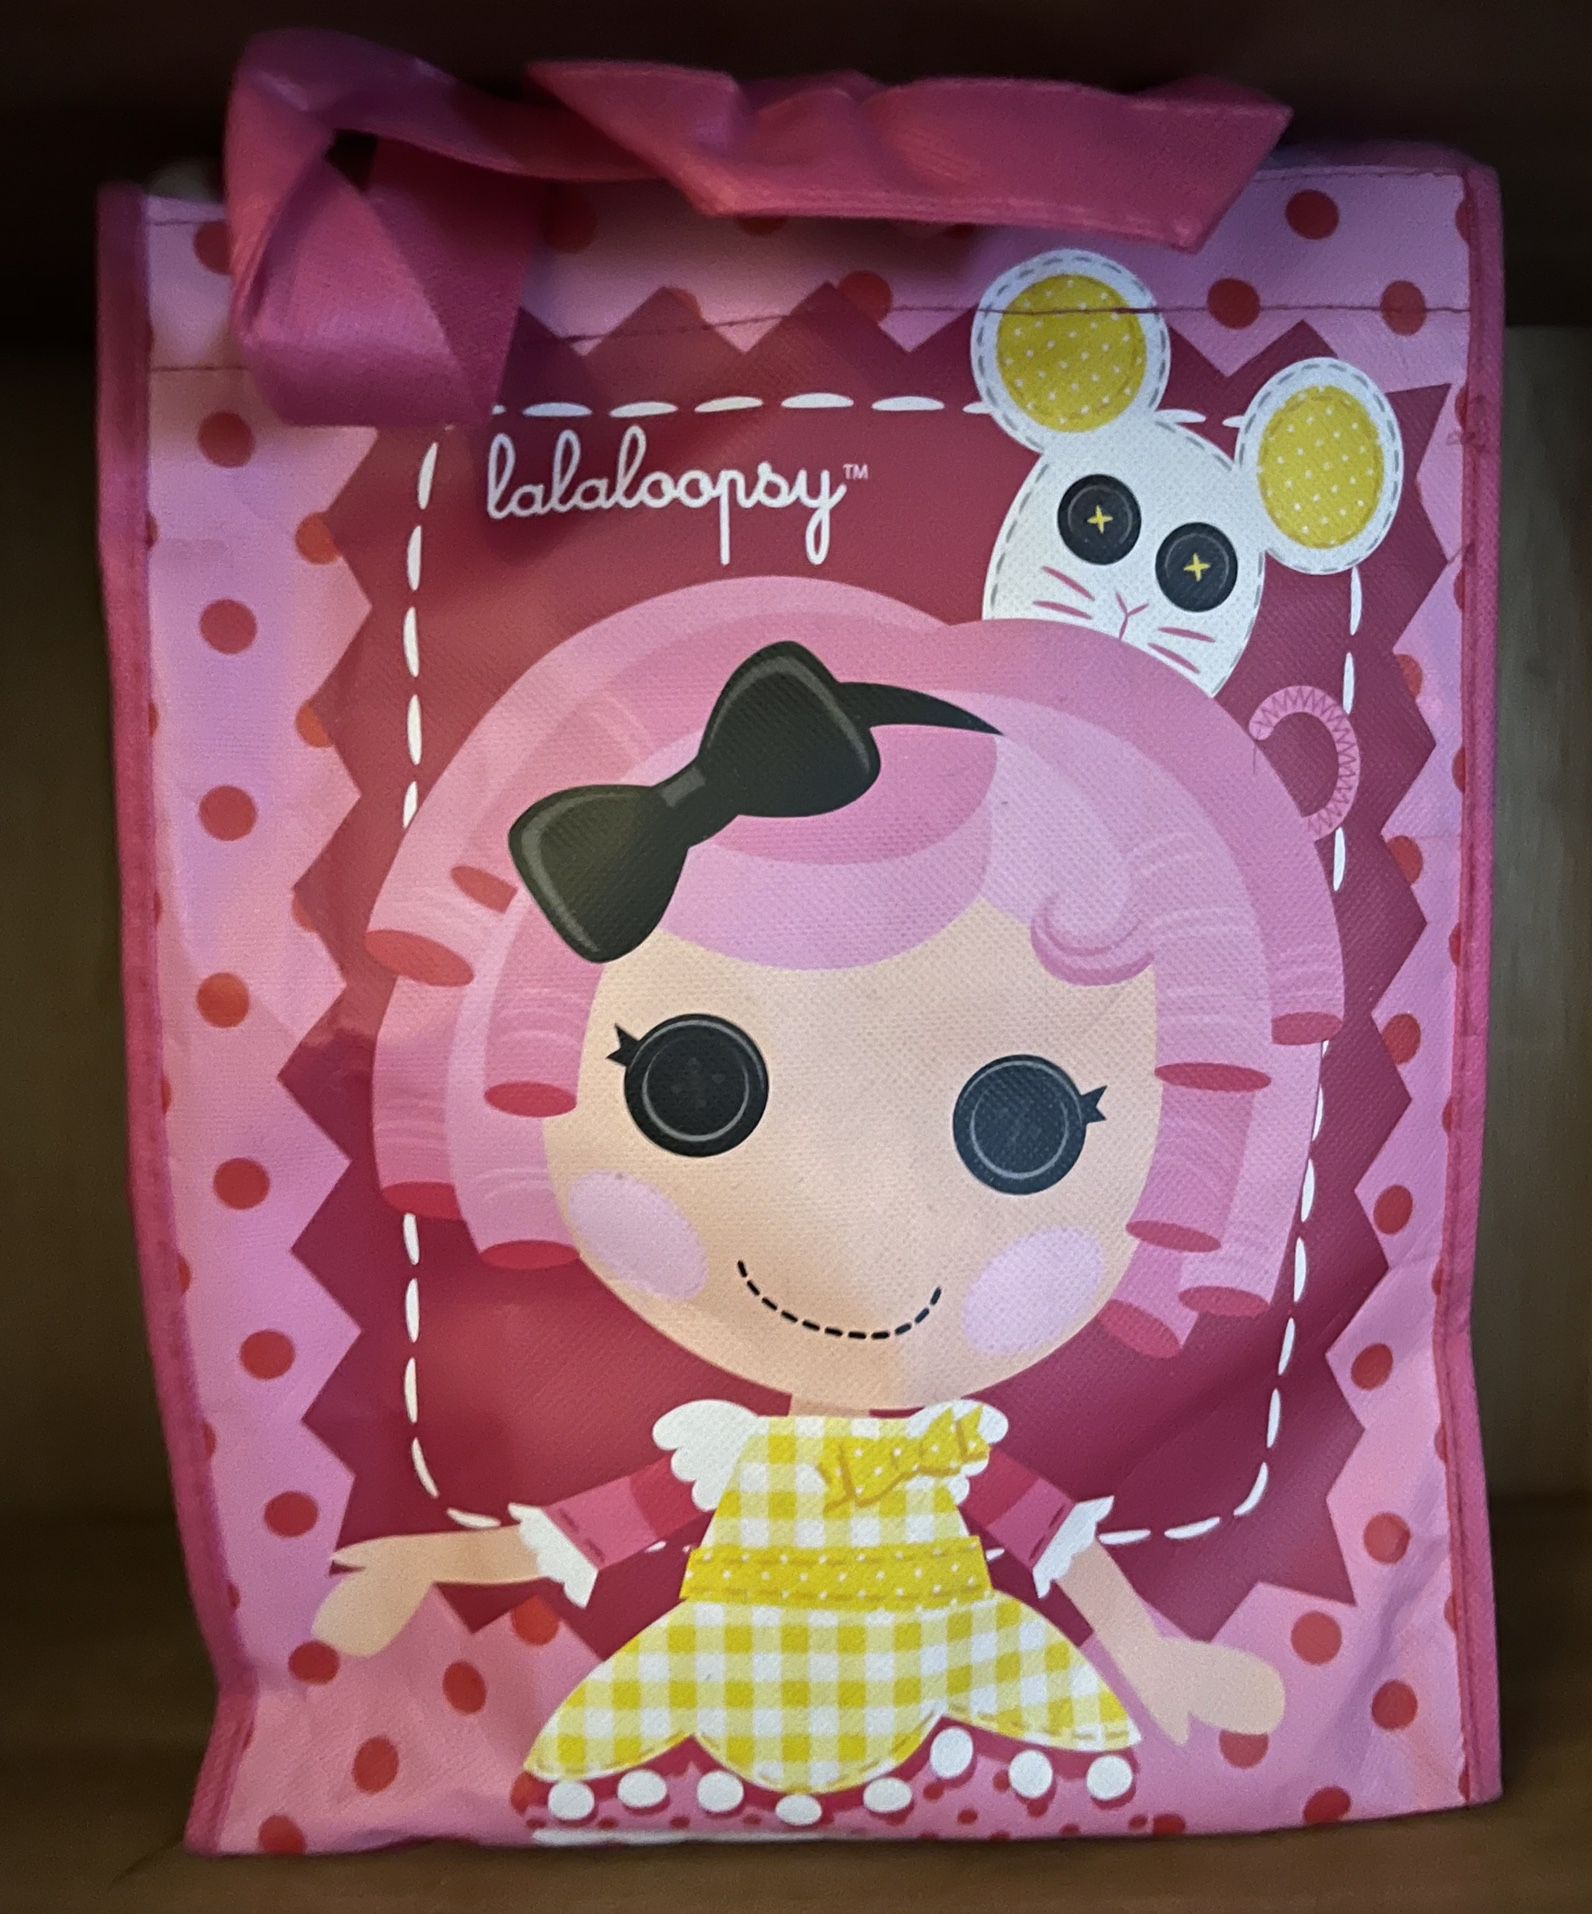 Lalaloopsy Child Blanket In Carry Bag NEW in Package!